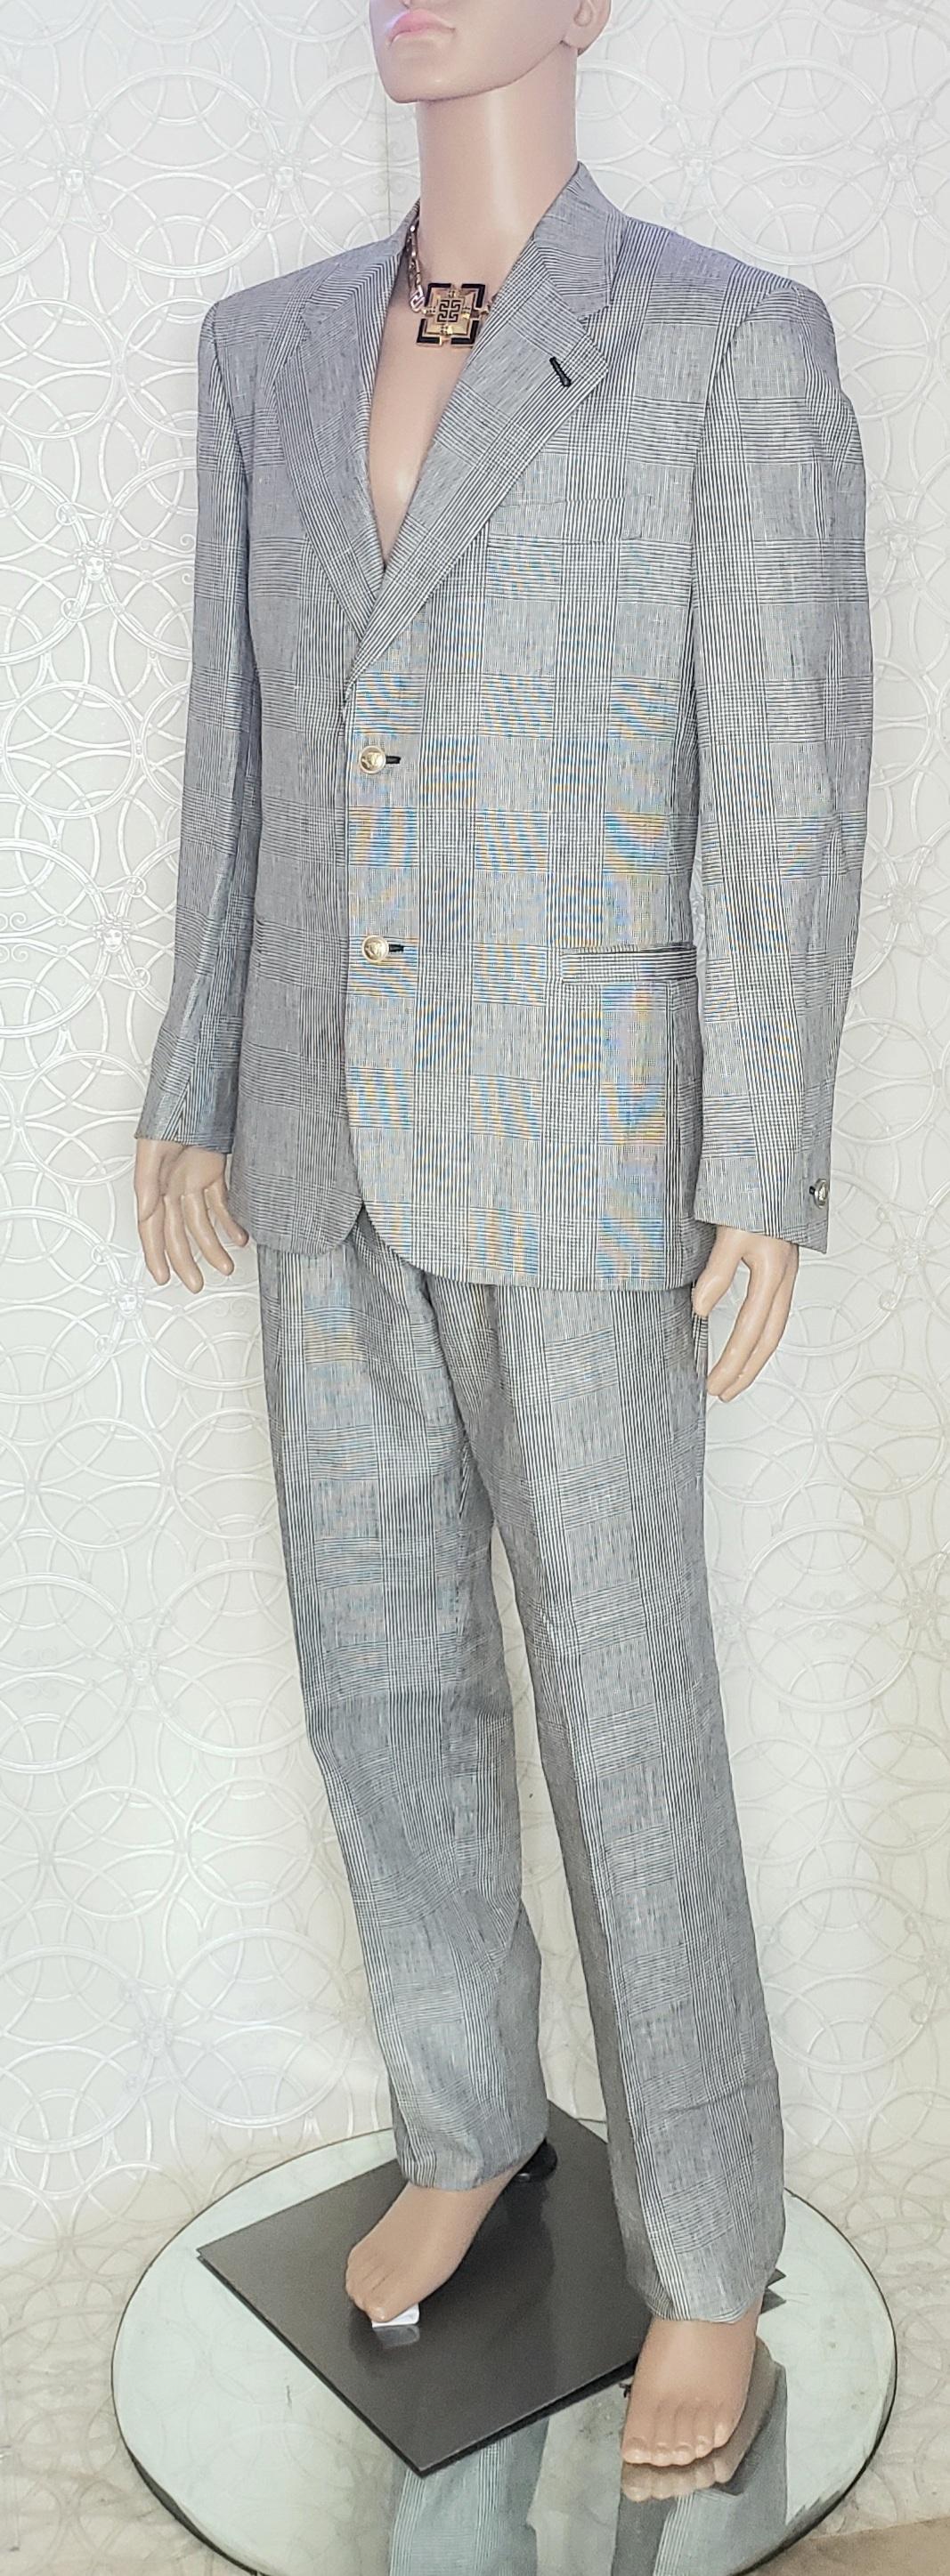 Gray VERSACE S/S 2012 look # 2 BRAND NEW GRAY SUIT 48 - 38 (M) For Sale